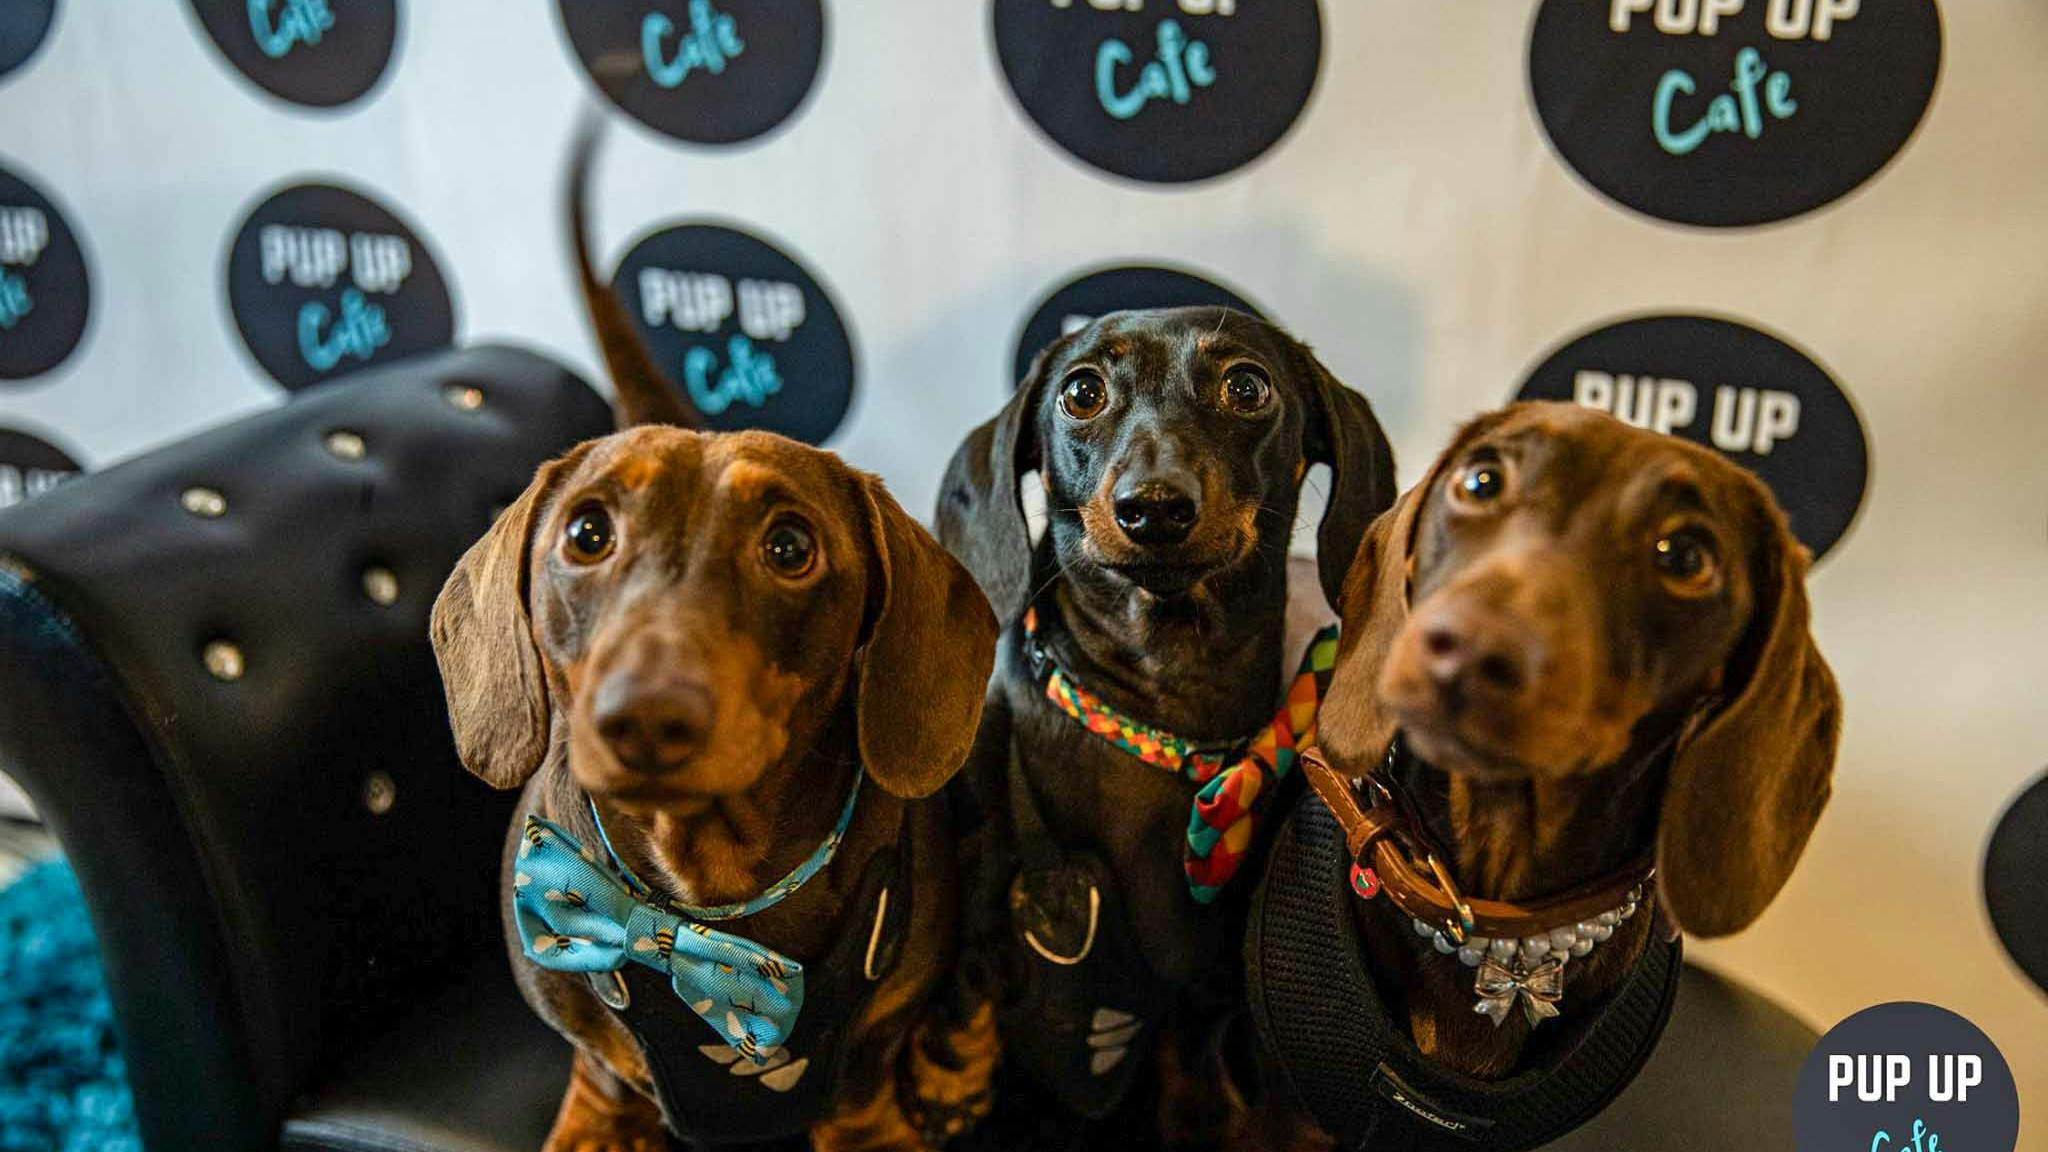 Pop-up dog cafe coming to Stafford for fifth year running